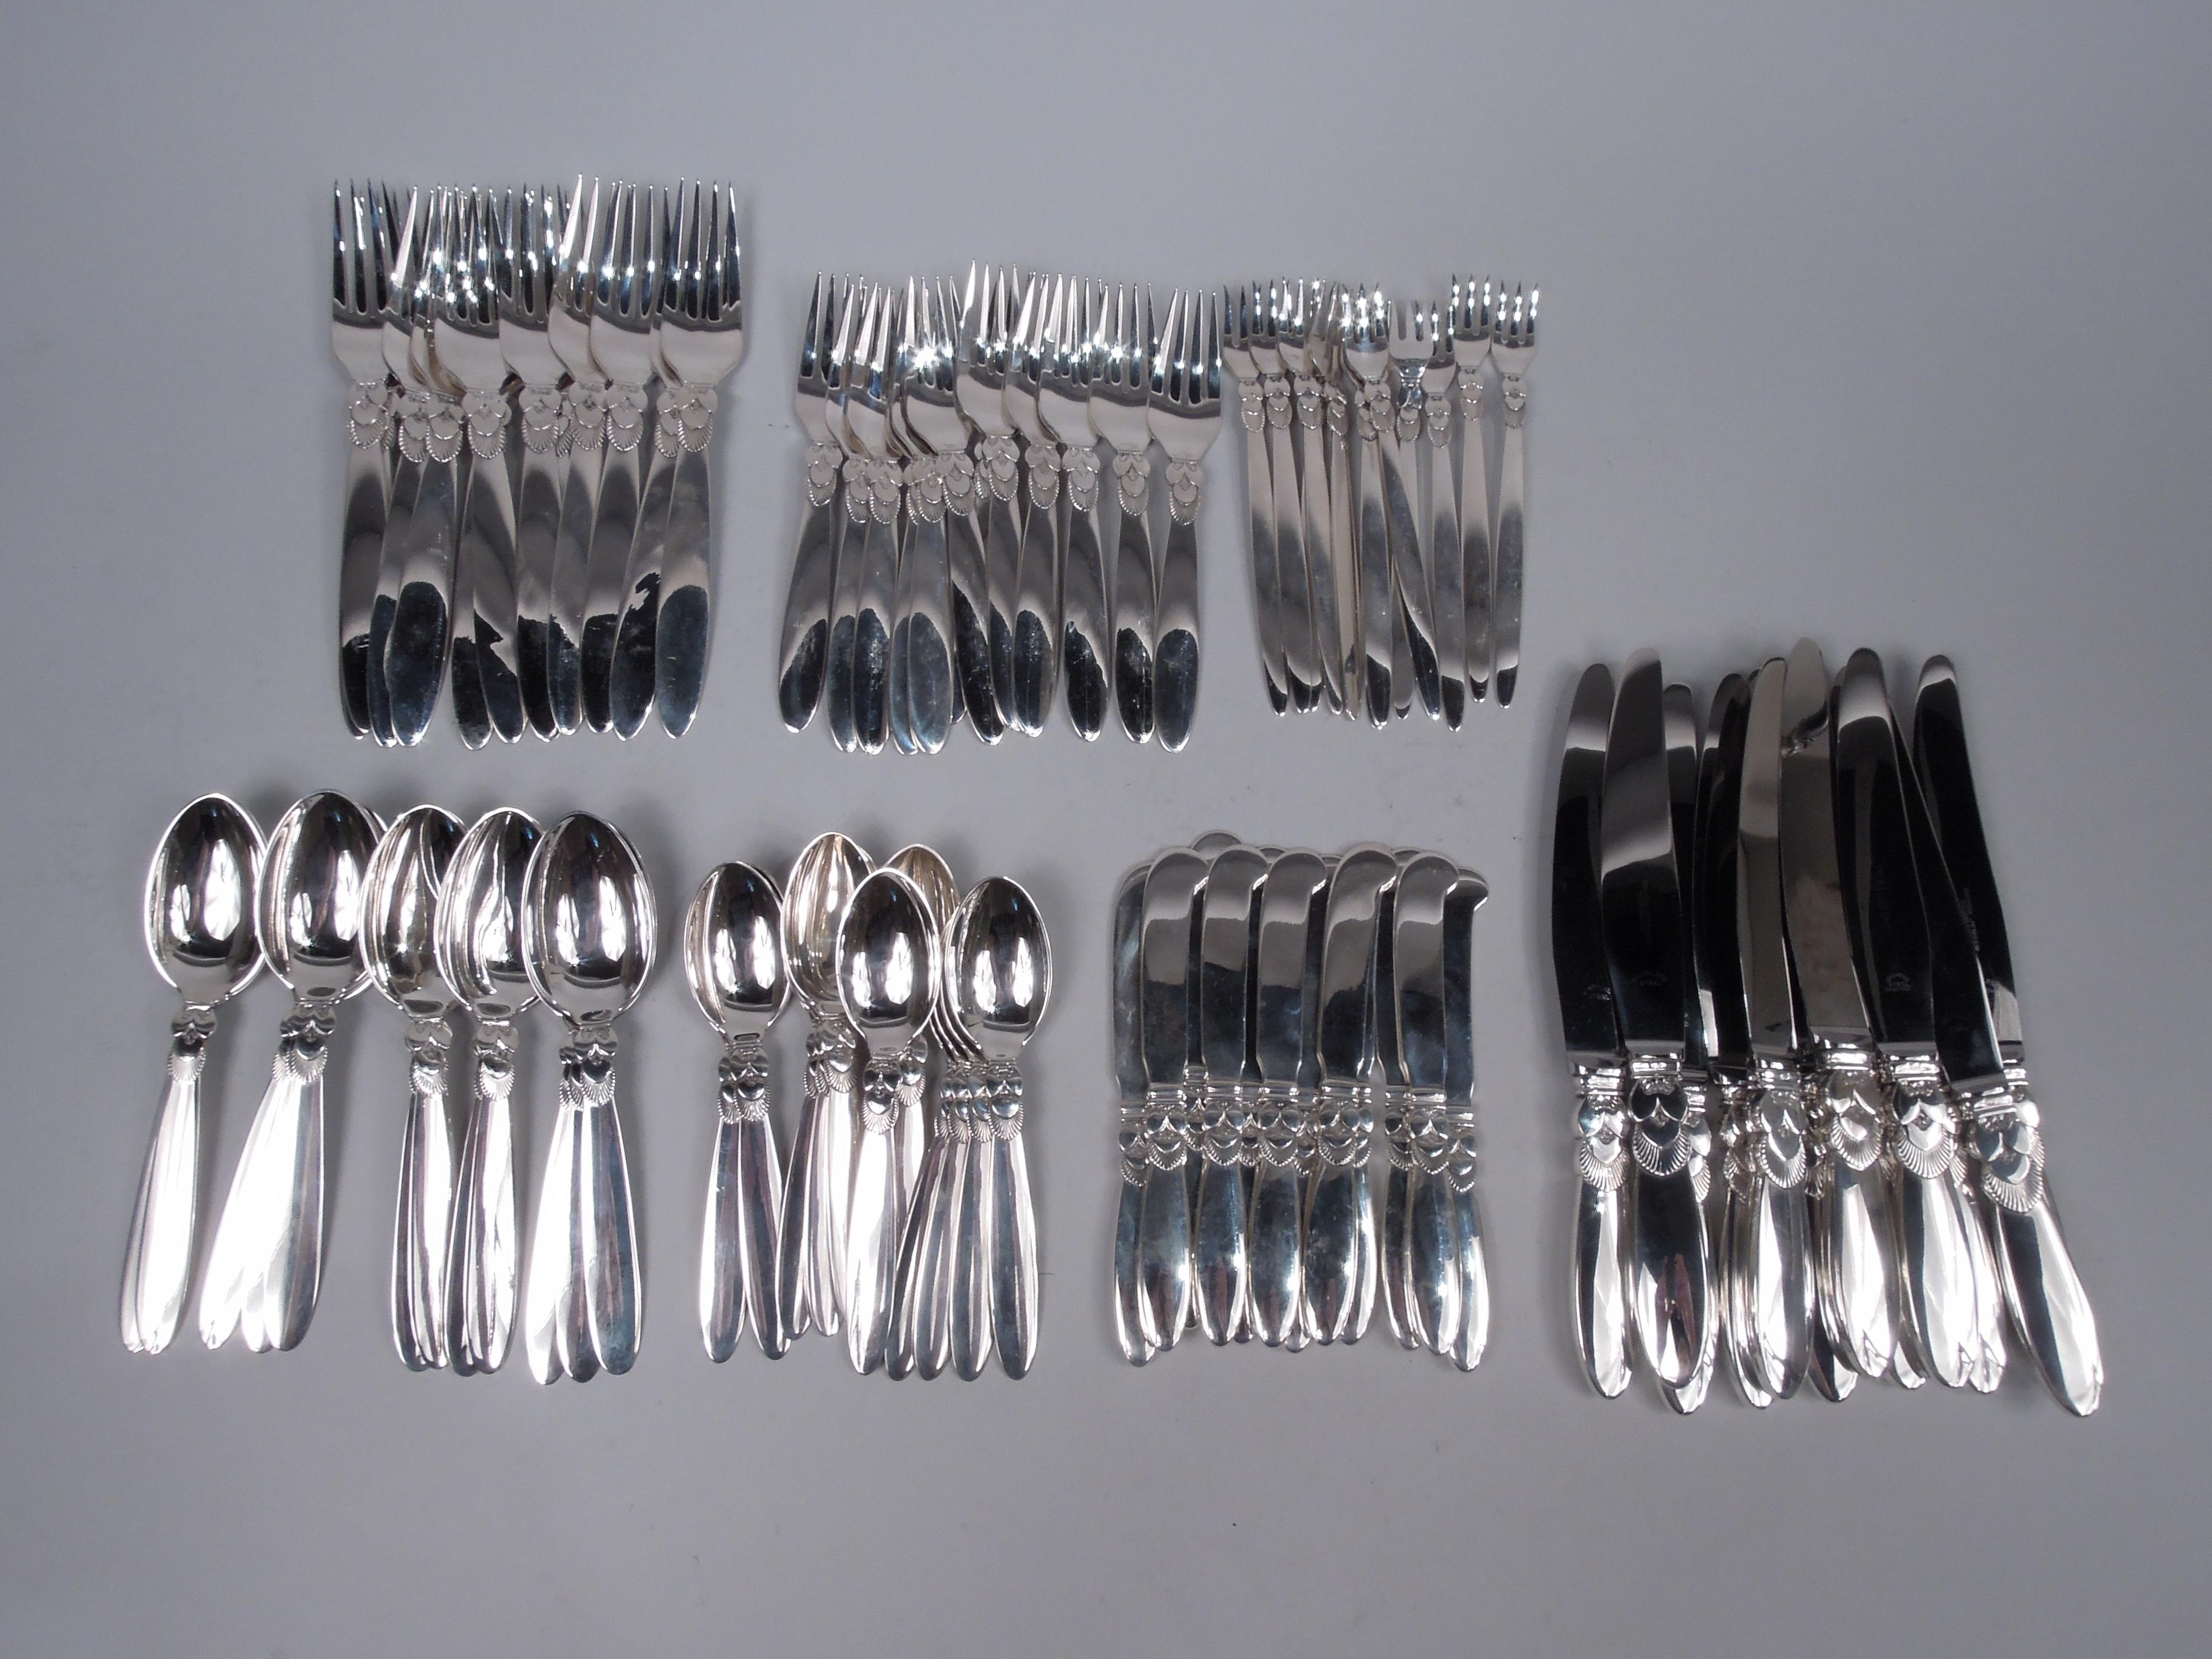 Cactus sterling silver dinner set. Made by Georg Jensen in Copenhagen. This set comprises 84 pieces (dimensions in inches):

Forks: 12 dinner forks (7 3/4), 12 luncheon forks (6 1/2), and 12 seafood forks (6 1/4);

Spoons: 12 dessert spoons (6 3/4)